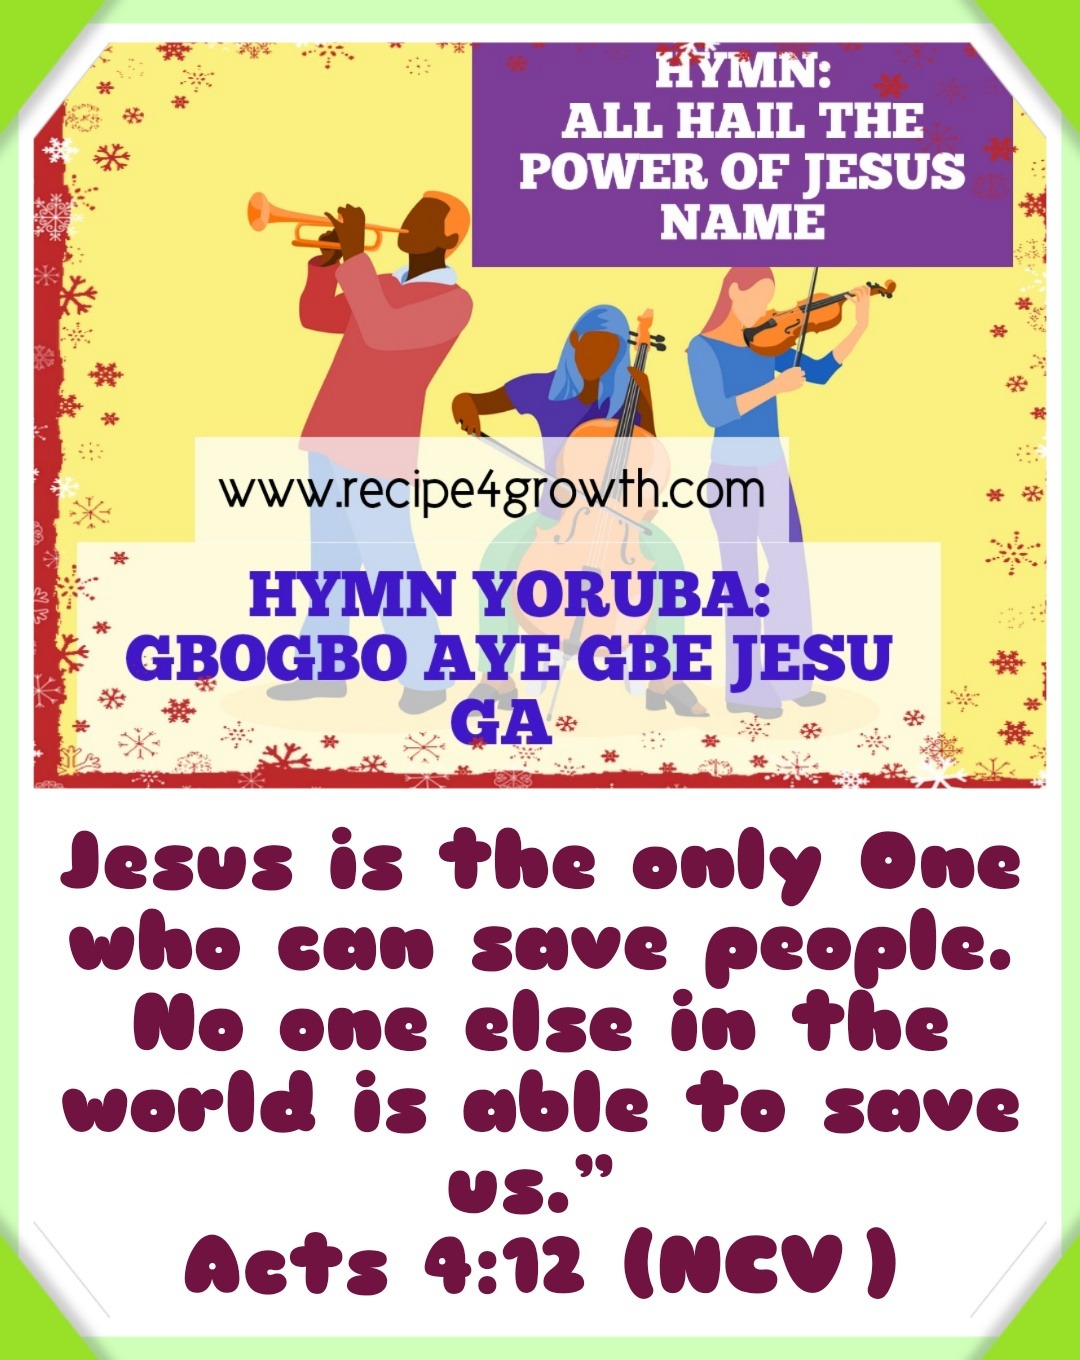 ALL HAIL THE POWER OF JESUS NAME